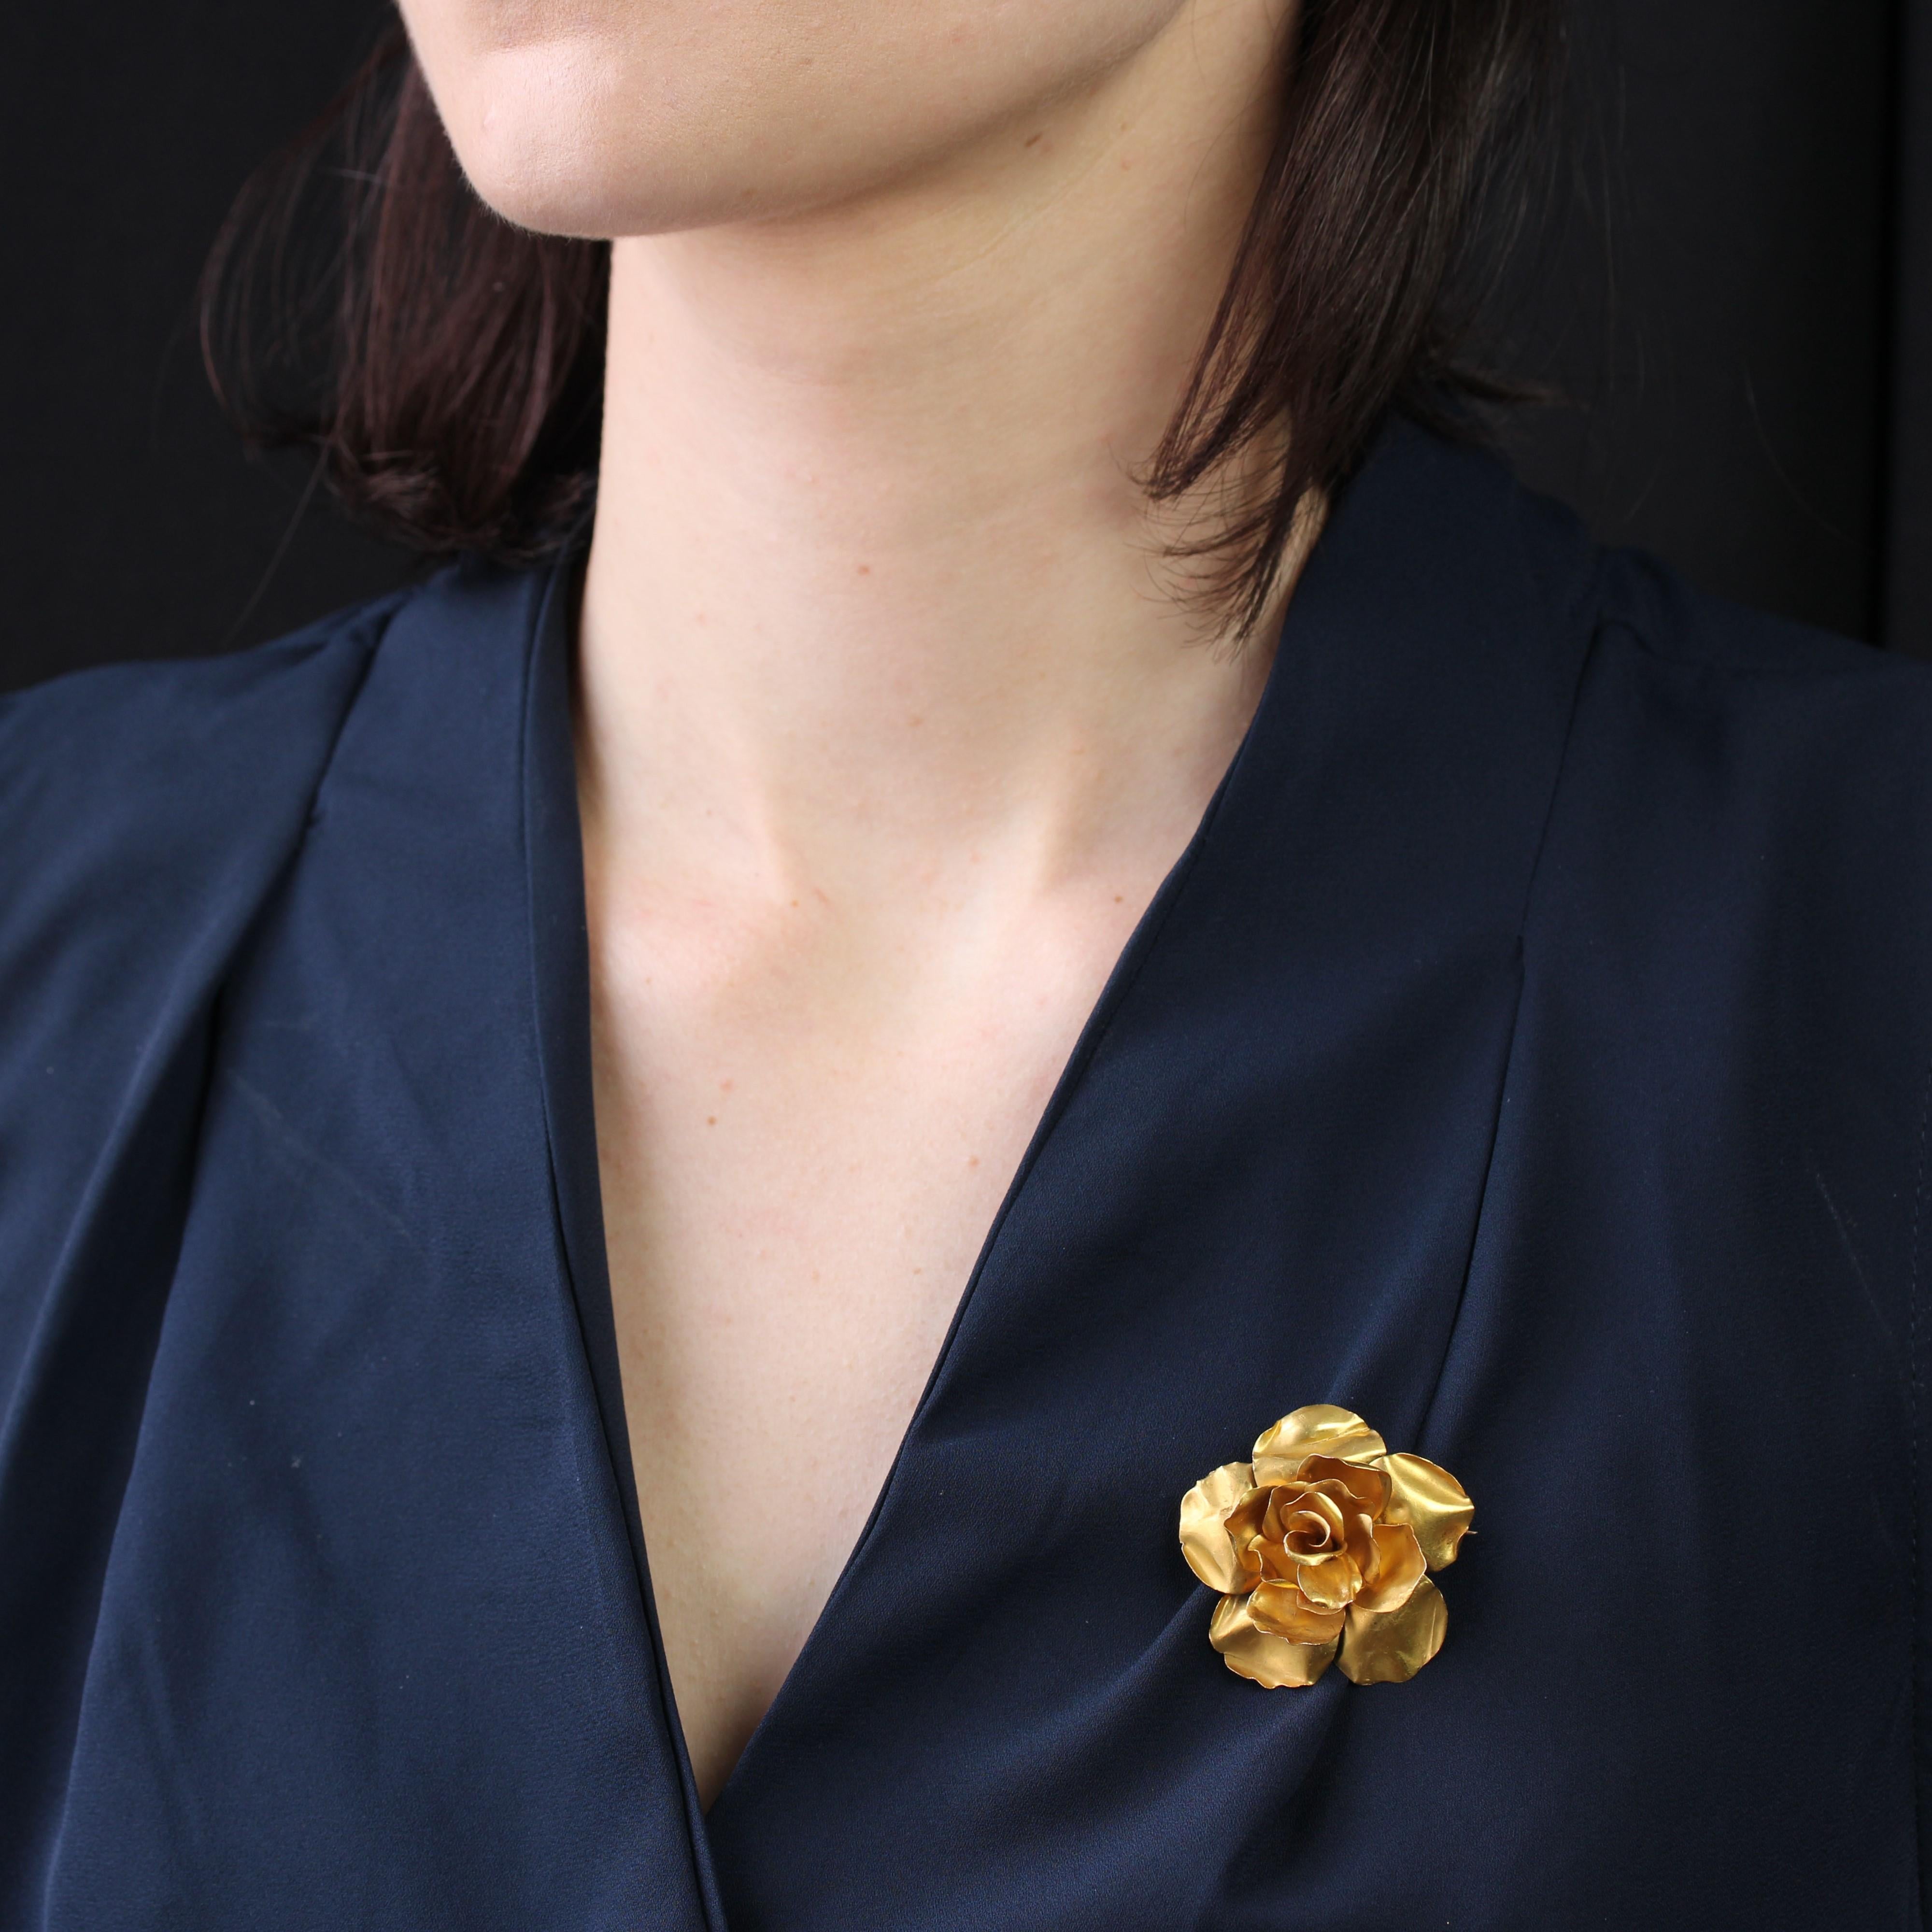 Brooch in 18 karat yellow gold, eagle head hallmark.
This elegant flower brooch features a blooming rose formed from small, flowing gold plates. The clasp is a pin with safety hook.
Height : 3,8 cm approximately, width : 3,8 cm approximately,